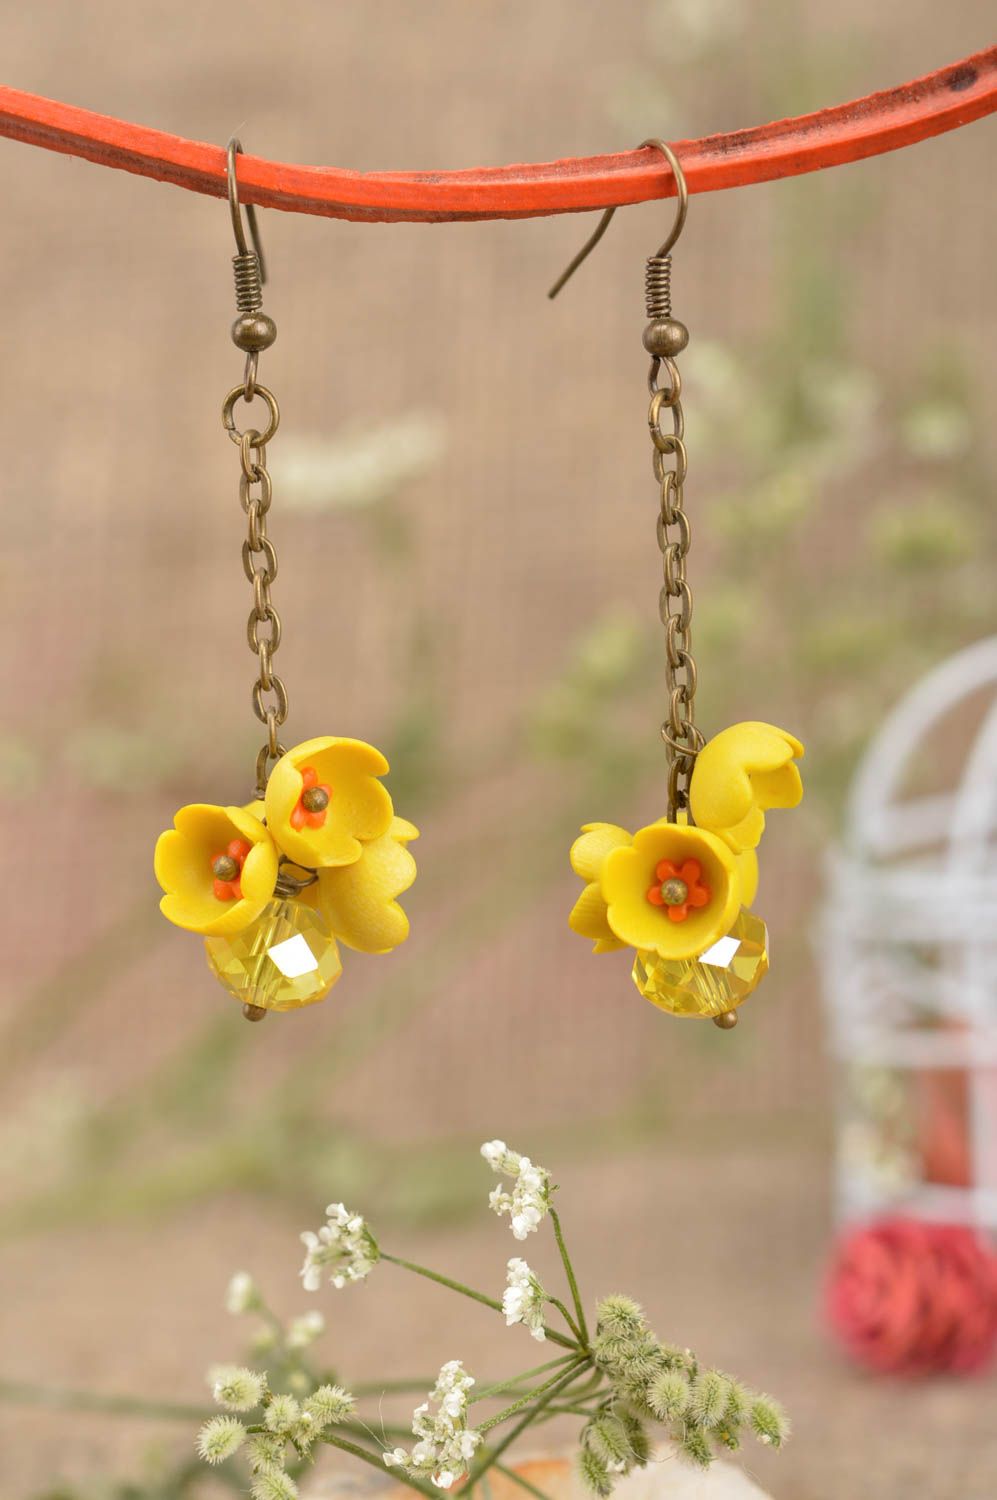 Unusual handmade plastic flower earrings fashion accessories gifts for her photo 1